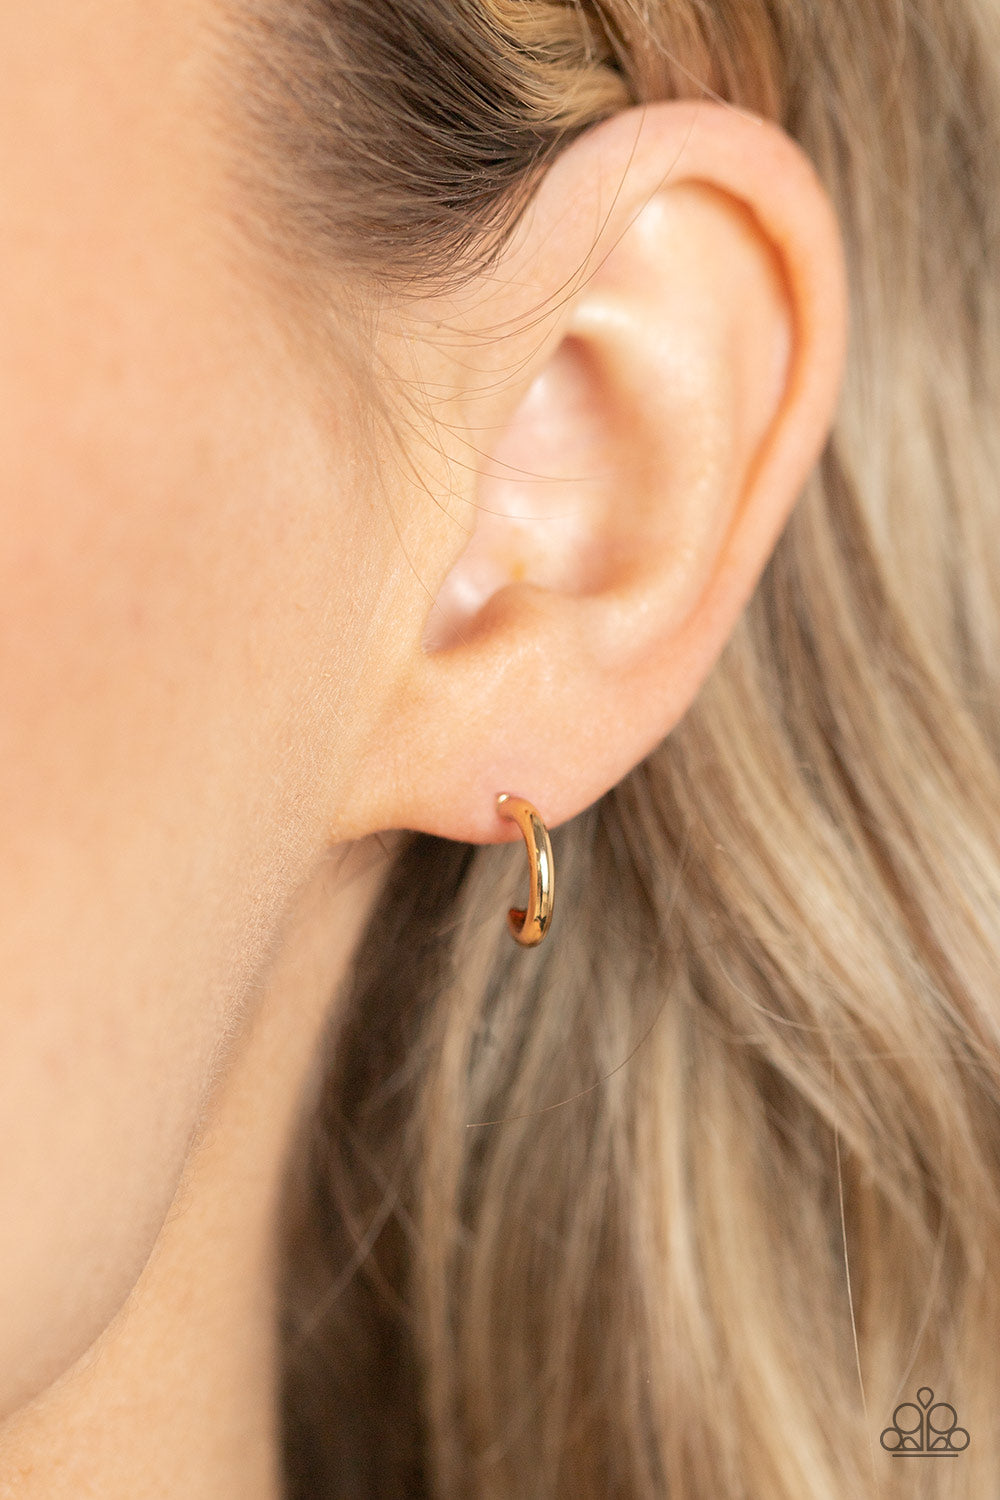 A glistening gold bar curves into a classic hoop, creating a dainty peek of shimmer. Earring attaches to a standard post fitting. Hoop measures approximately 1/2